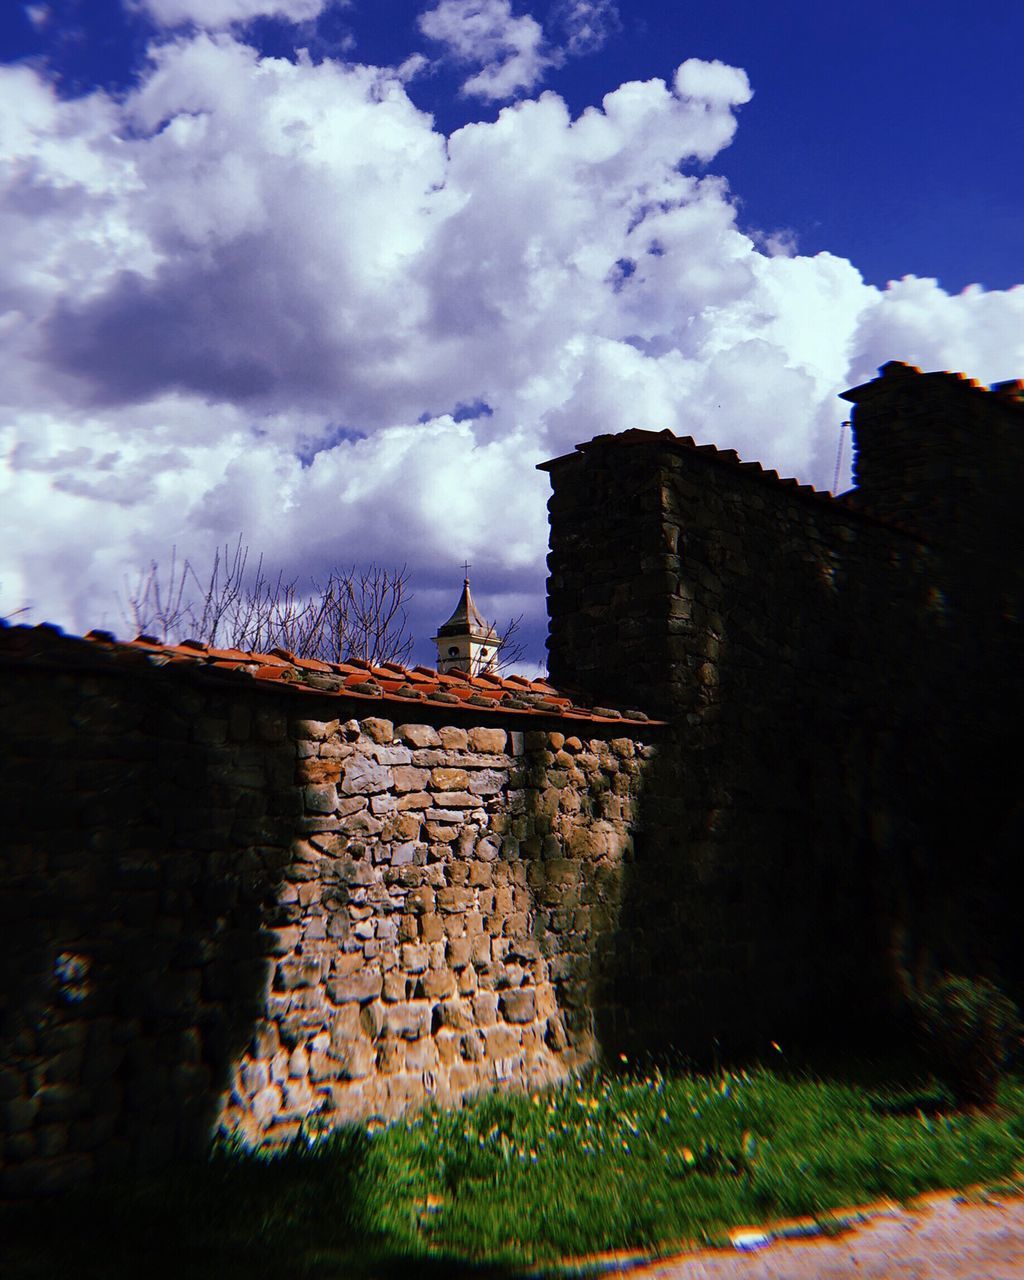 built structure, architecture, cloud - sky, sky, building exterior, building, history, the past, nature, no people, day, religion, place of worship, belief, old, low angle view, castle, wall, spirituality, outdoors, stone wall